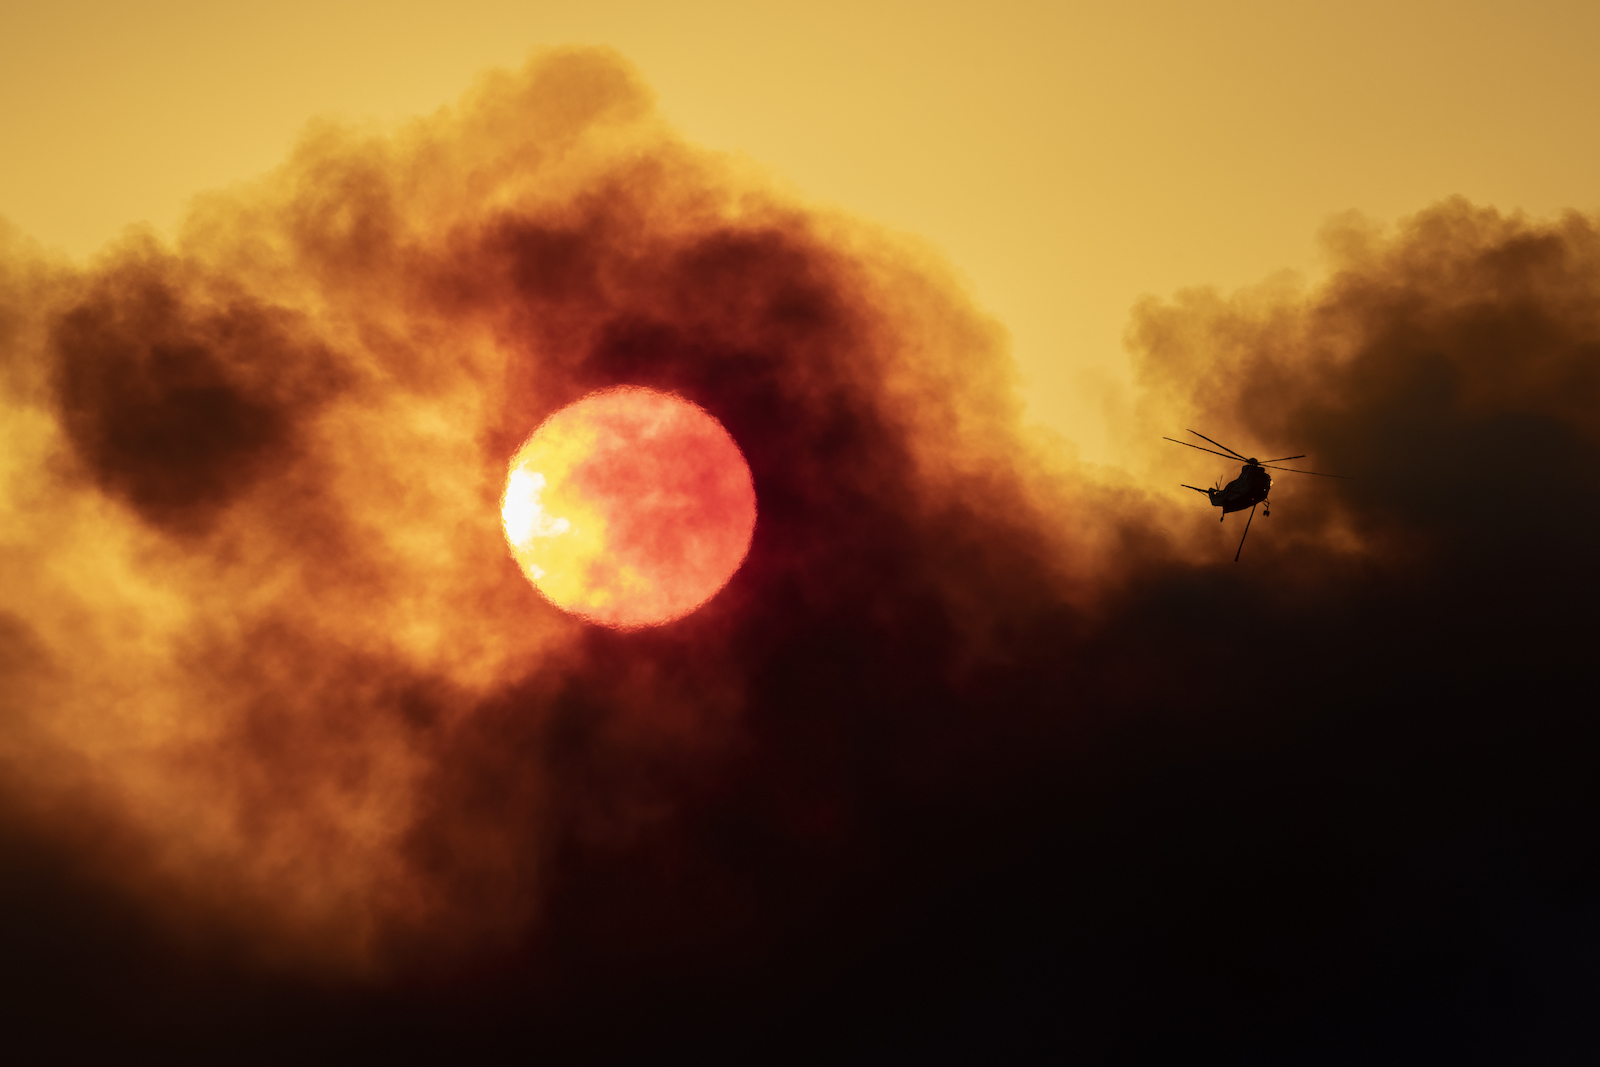 A firefighting helicopter flies as smoke from the Alisal Fire shrouds the sun on October 13, 2021 near Goleta, California. Pushed by high winds, the Alisal Fire grew to 6,000 acres overnight, shutting down the much-traveled 101 Freeway along the Pacific Coast.